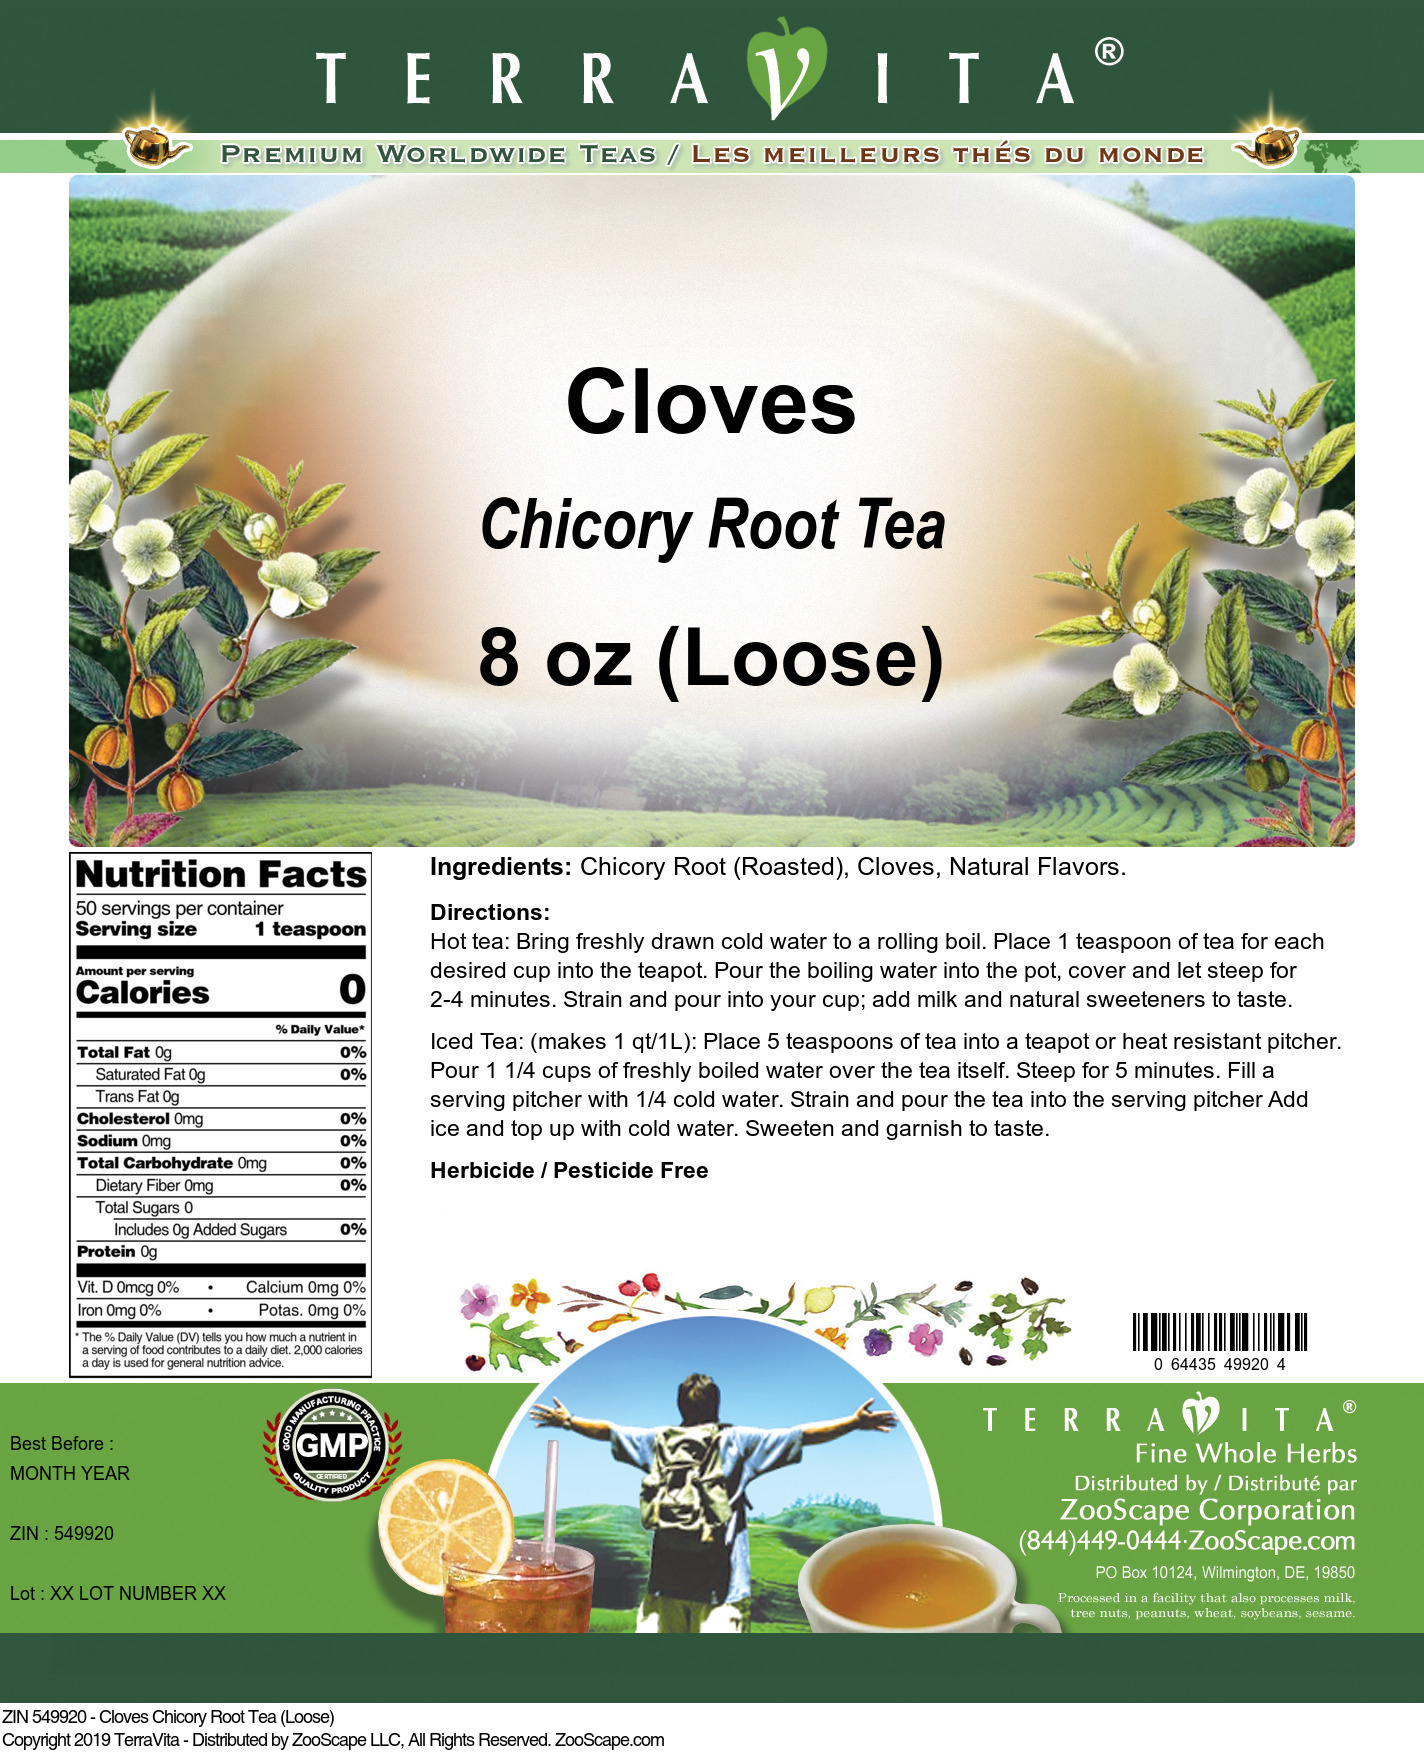 Cloves Chicory Root Tea (Loose) - Label